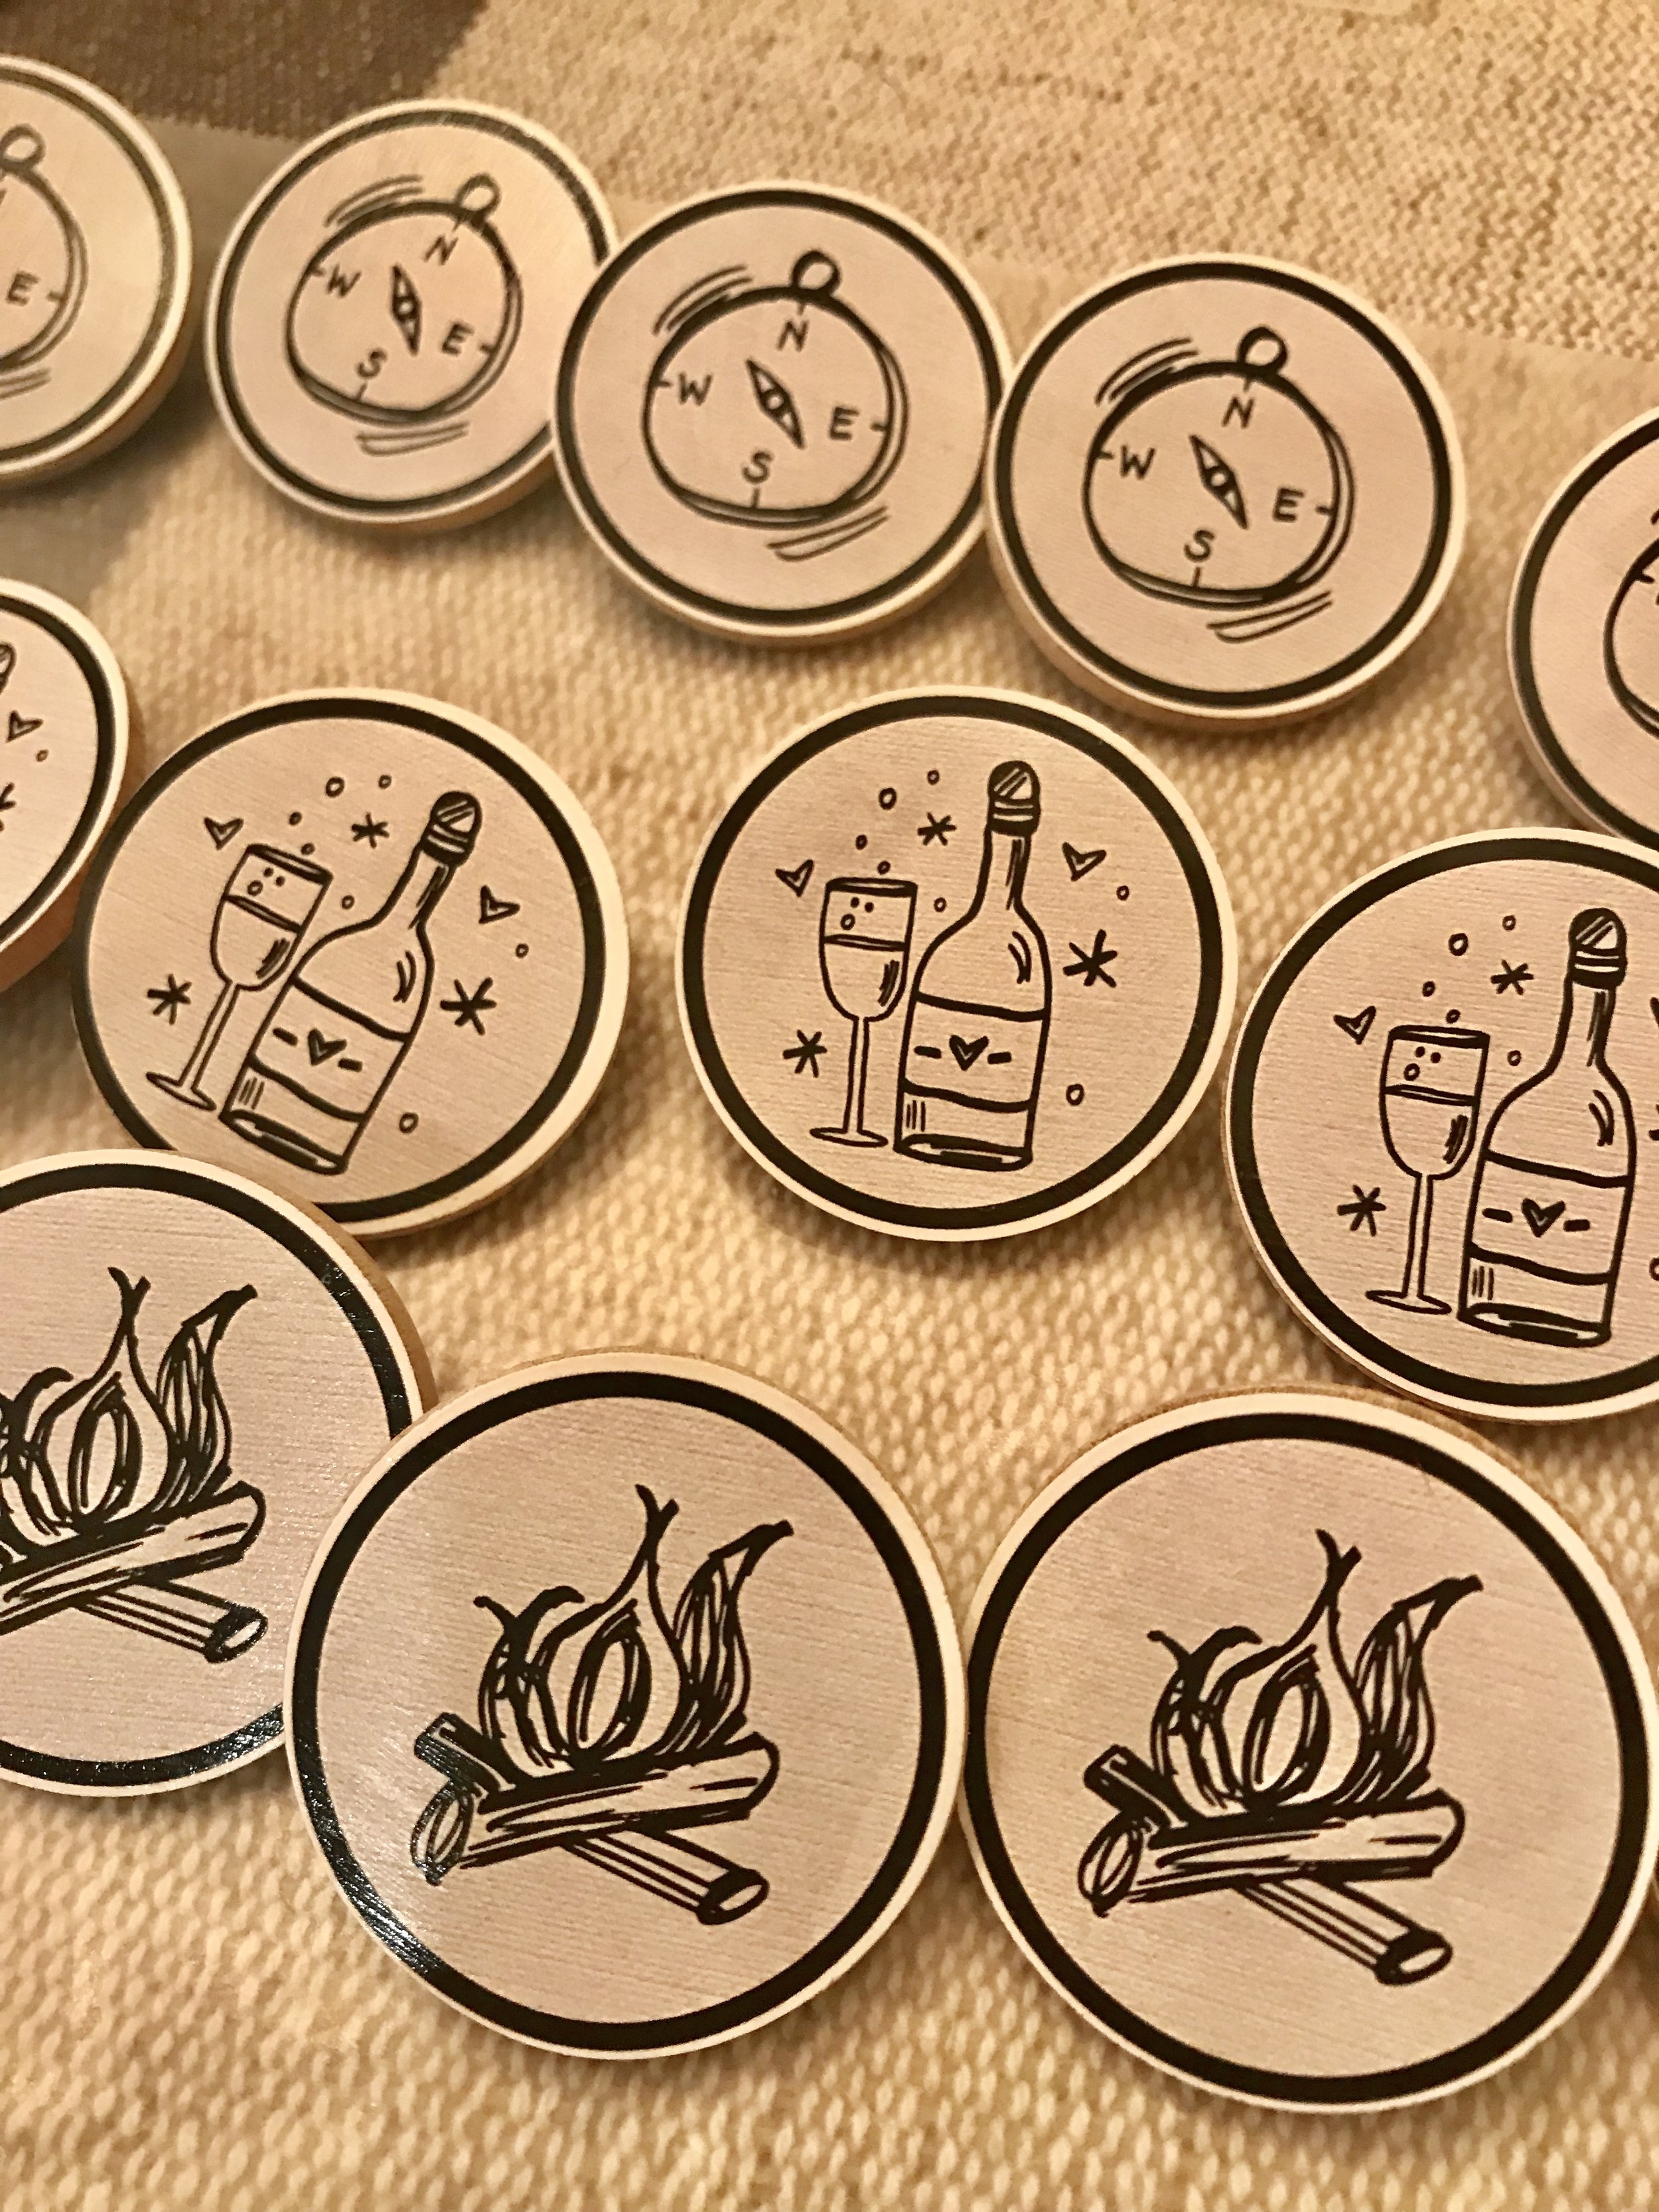  Use Mod Podge to add printed merit badges to wood discs. 